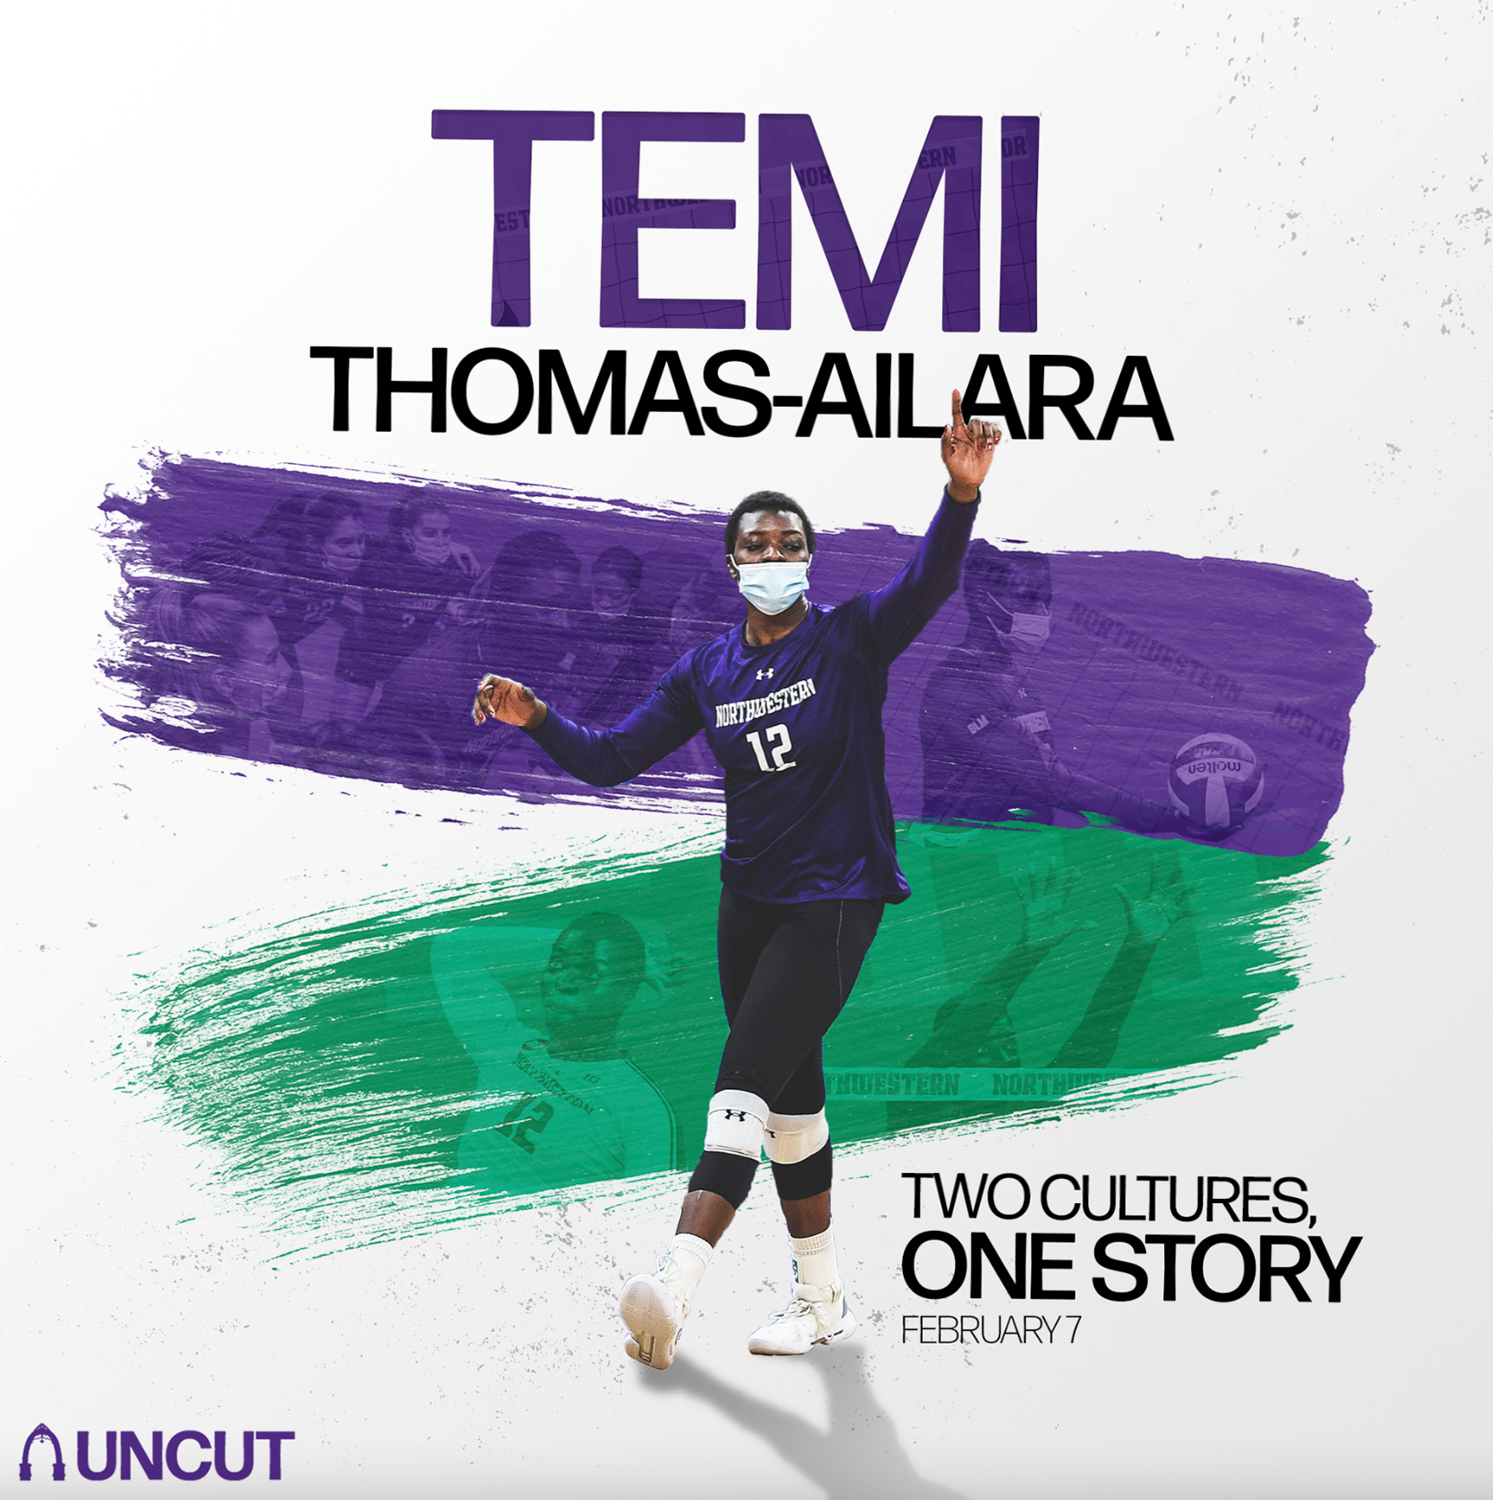 Graphic for the story "Two Cultures, One Story," written by volleyball player Temi Thomas-Ailara